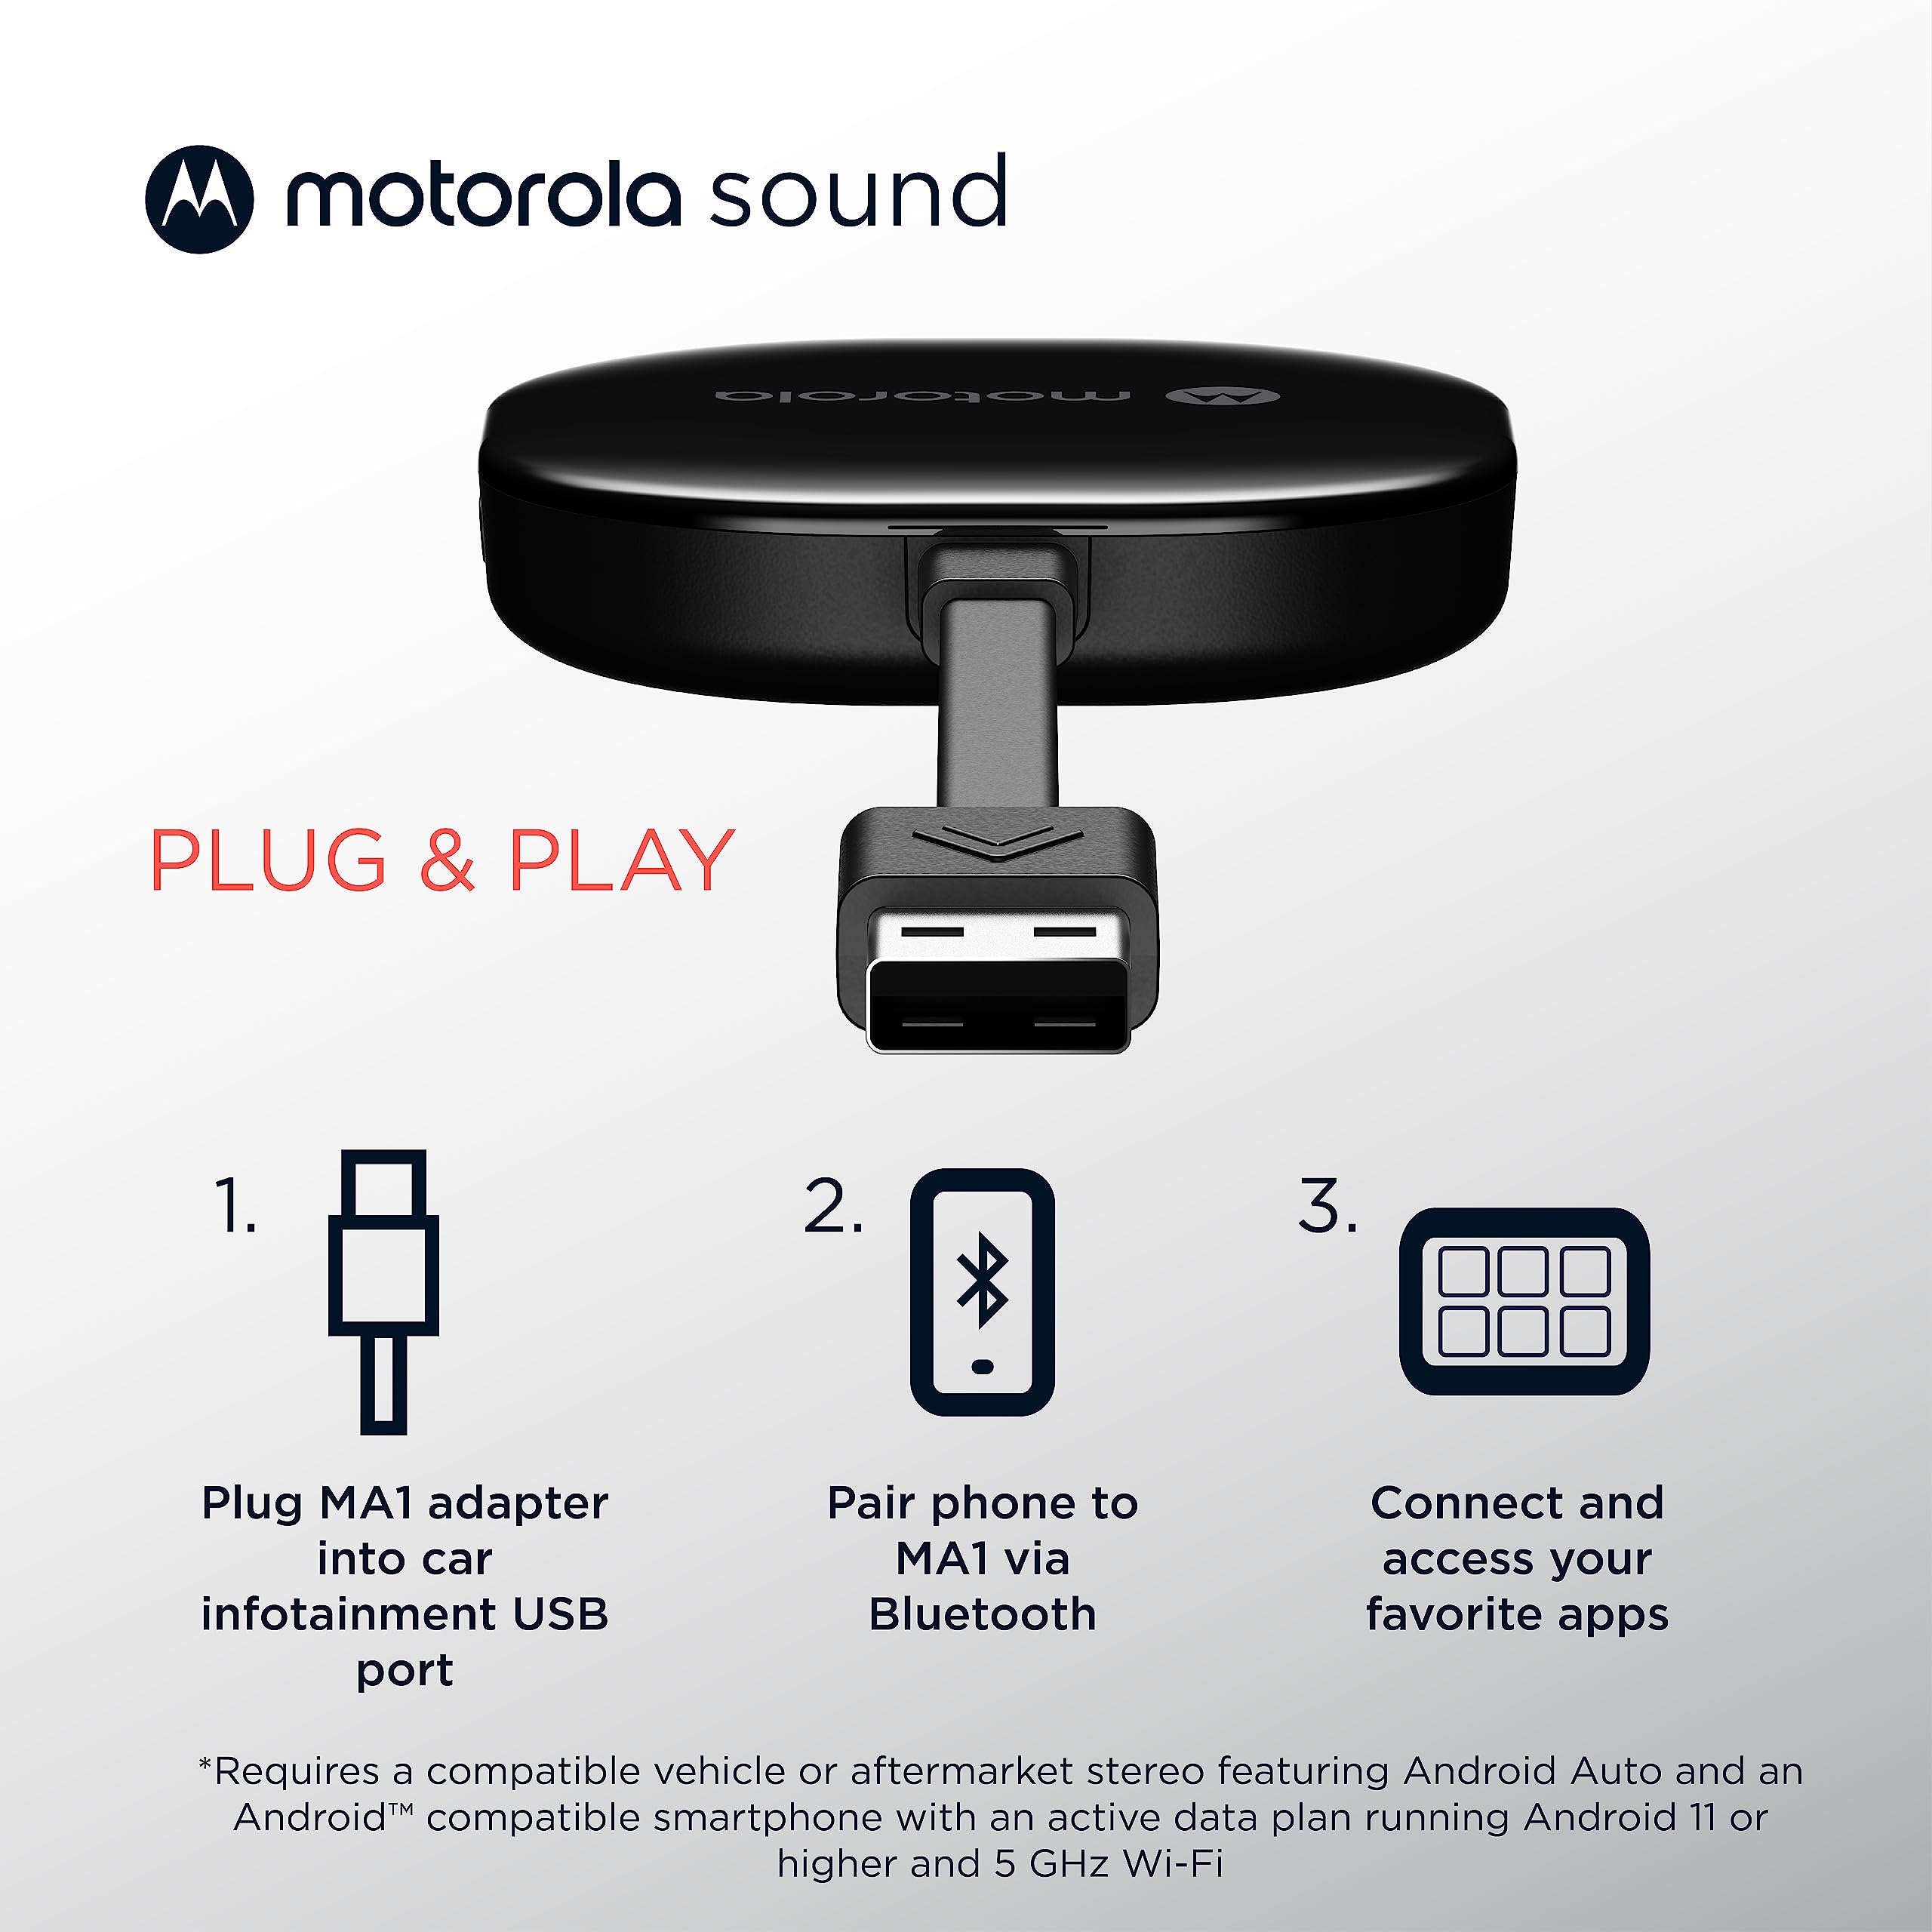 Motorola MA1 Wireless Android Auto Car Adapter - Instant Connection from Smartphone to Car Screen with Easy Setup - Direct Plug-in USB Adapter - Secure Gel Pad Included